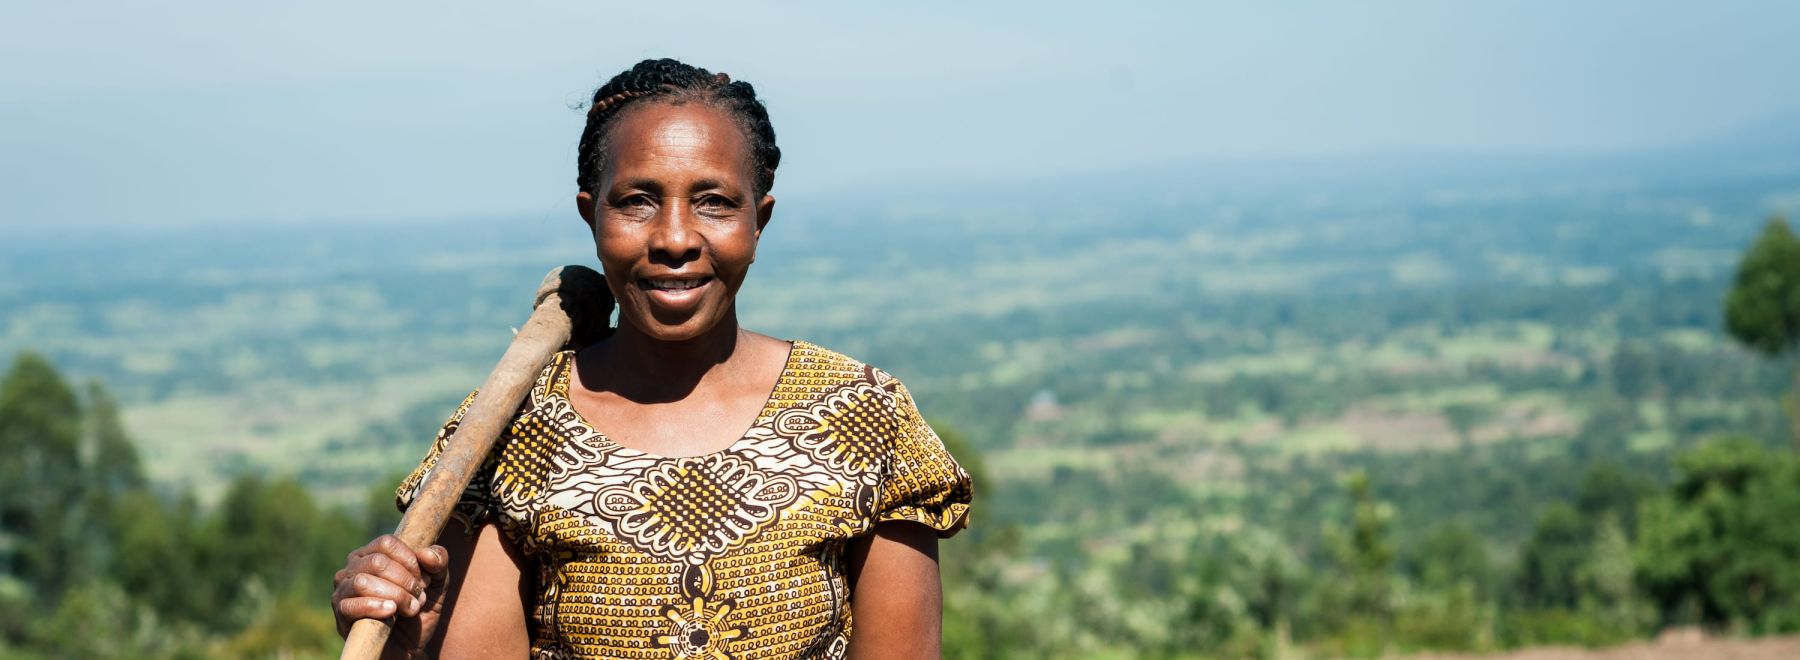 A female farmer stands in her field overlooking a beautiful view in Kenya